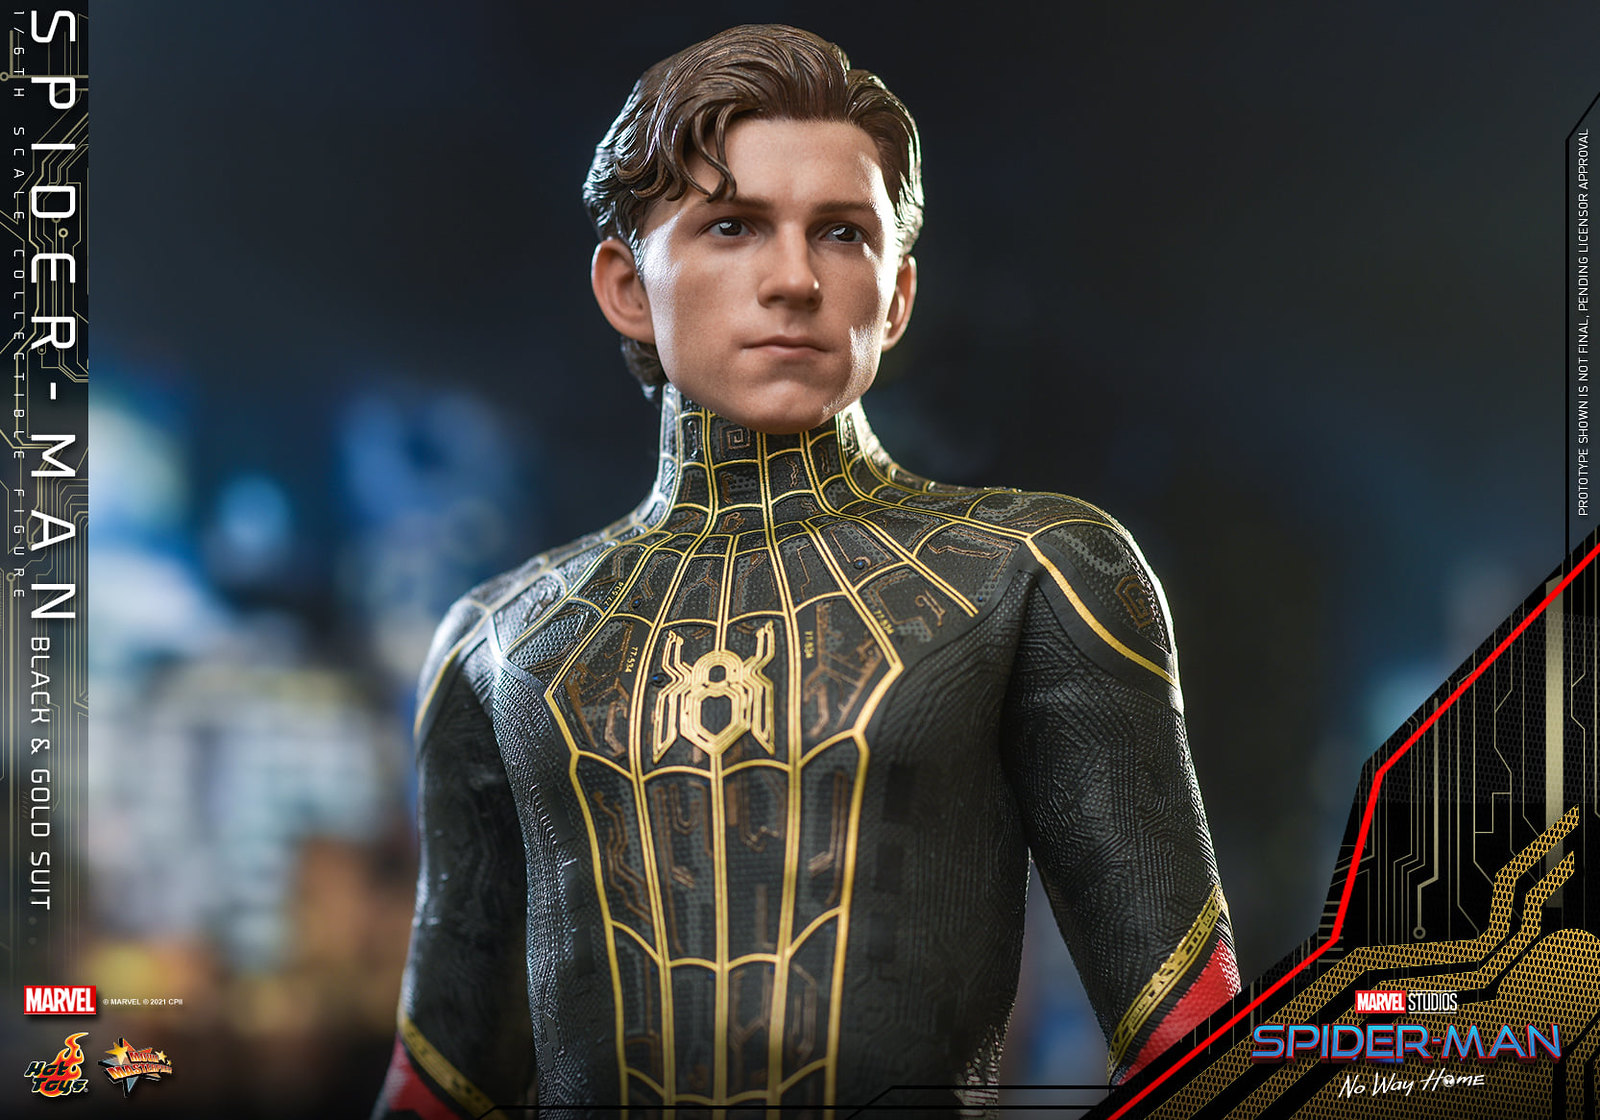 NEW PRODUCT: Hot Toys 【Spider-Man: No Way Home - 1/6th scale Spider-Man (Black & Gold Suit) Collectible Figure】 51310522807_3561c17255_h